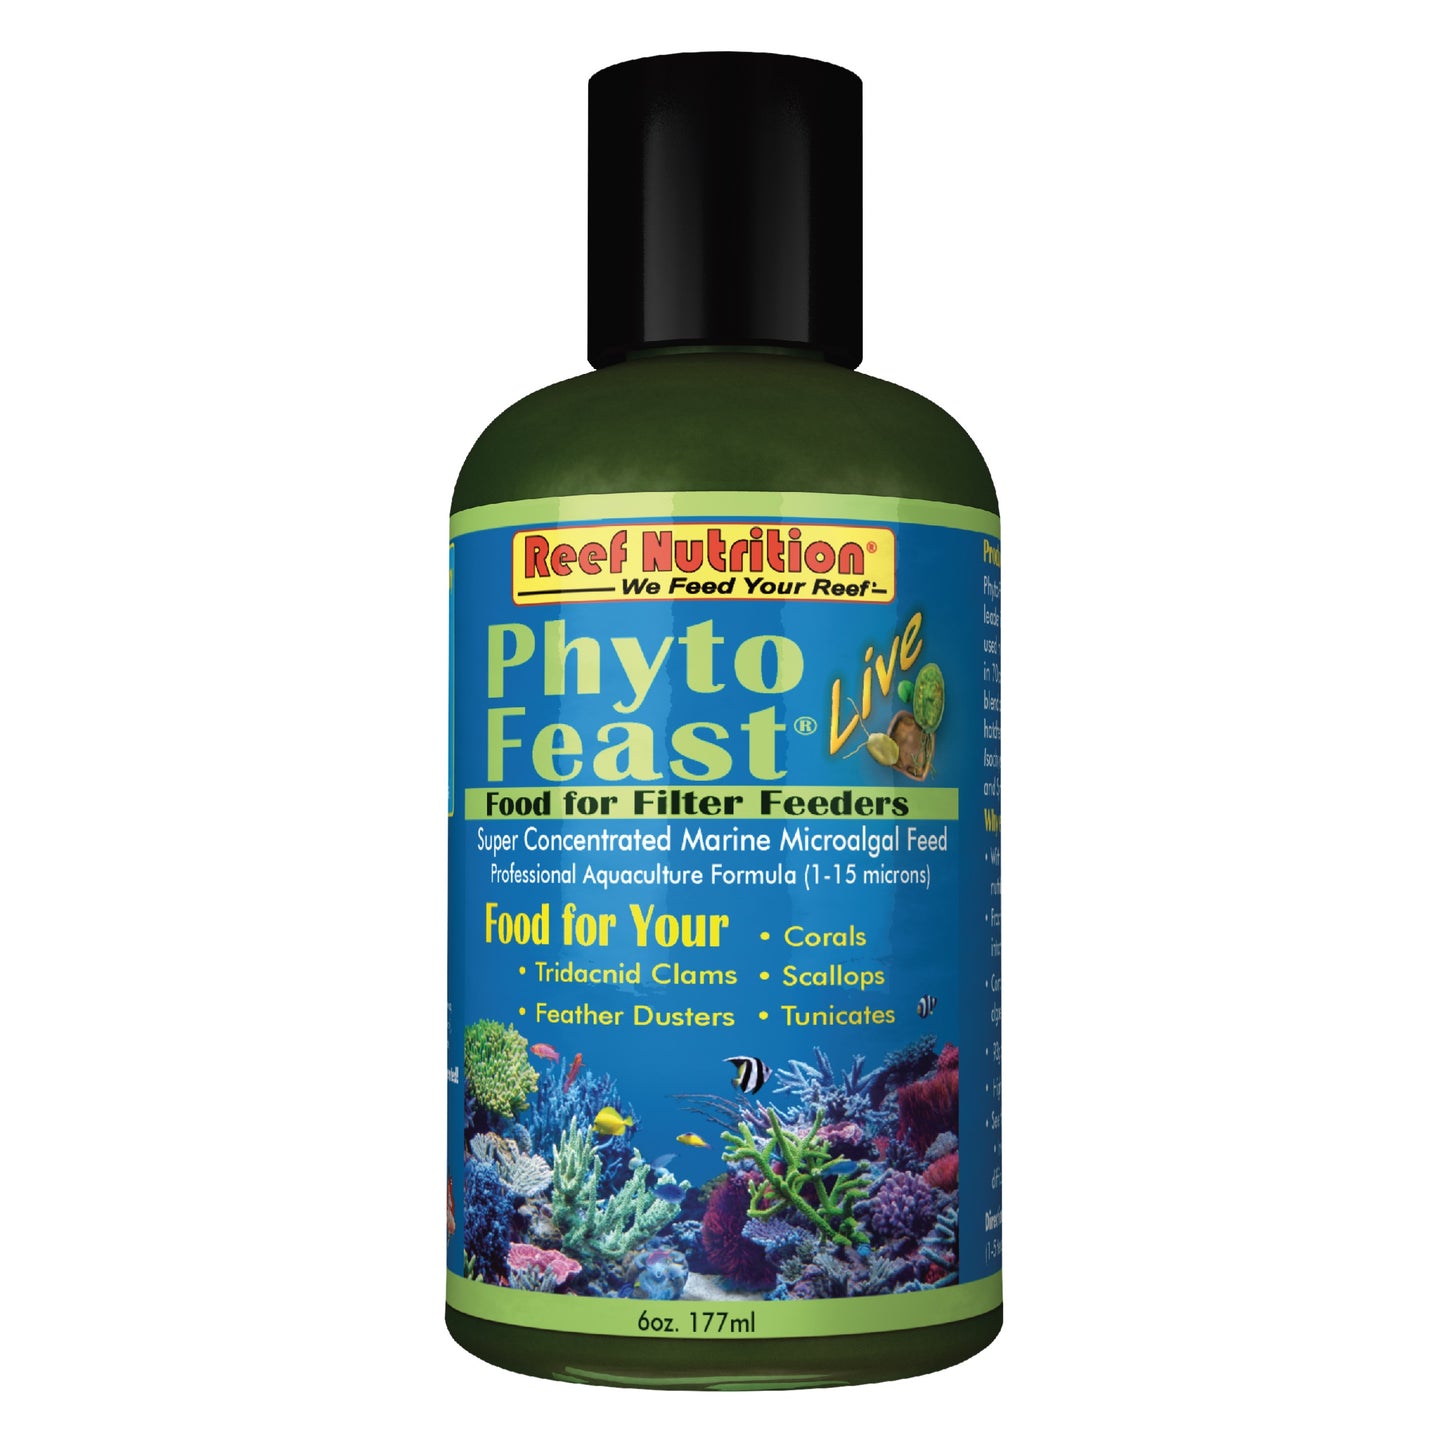 Reef Nutrition Phyto Feast Live